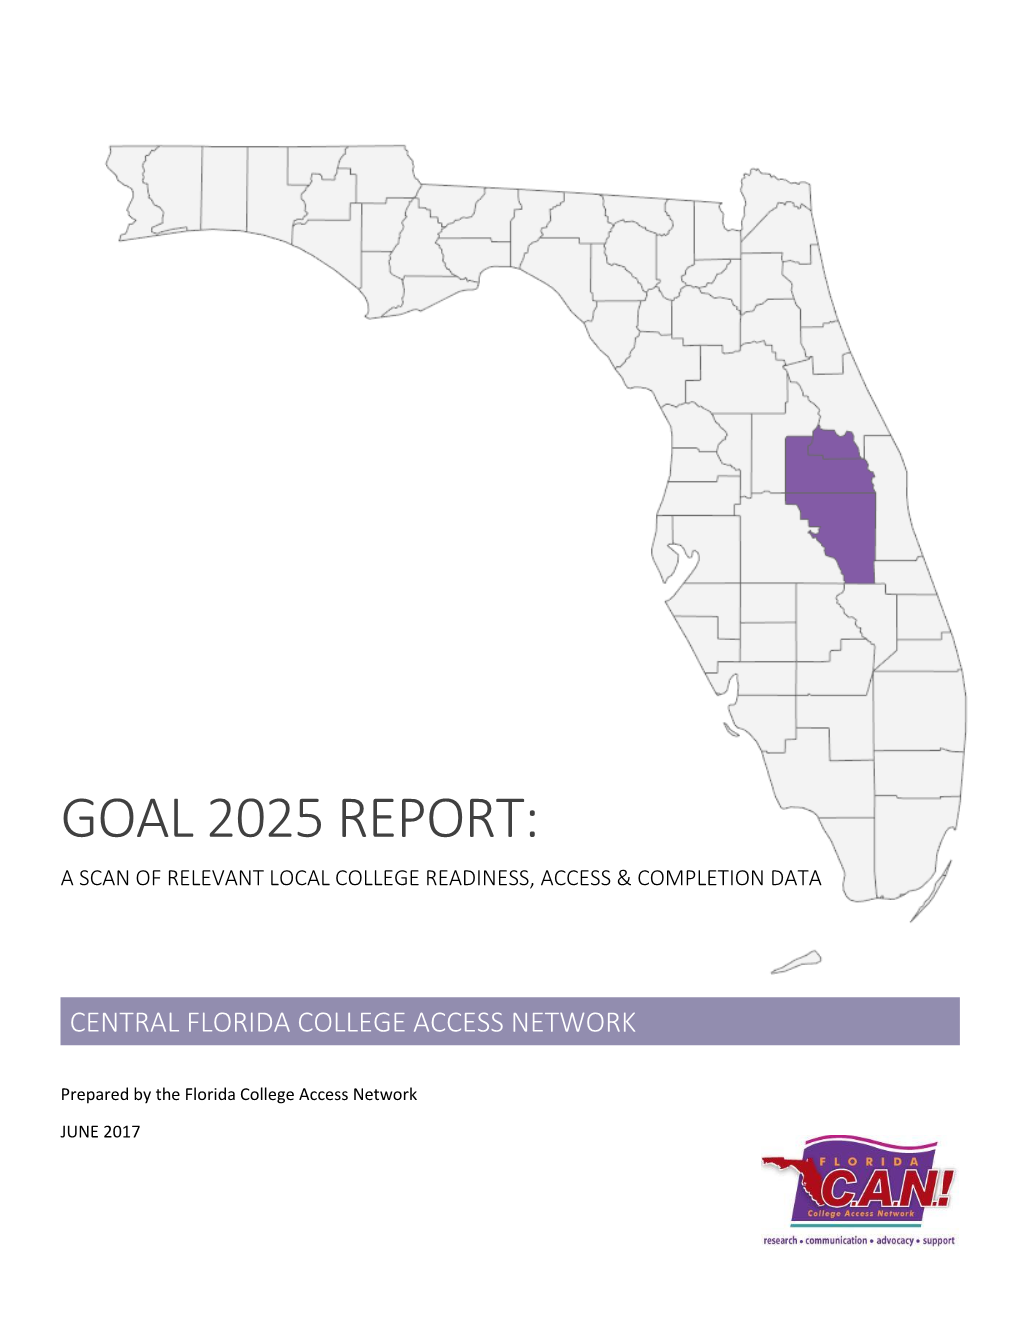 Goal 2025 Report: a Scan of Relevant Local College Readiness, Access & Completion Data